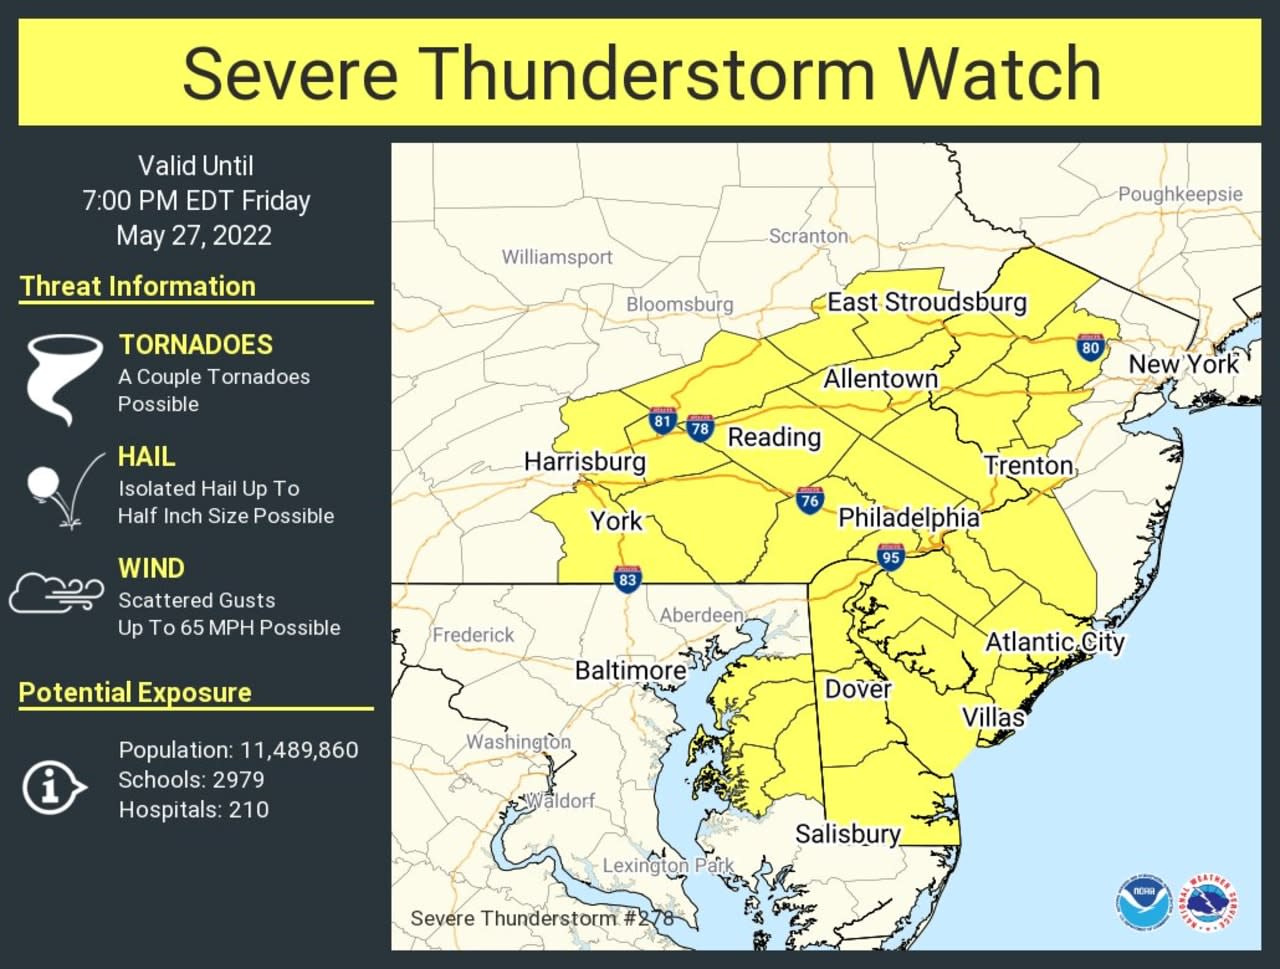 Weather map for a severe thunderstorm watch.